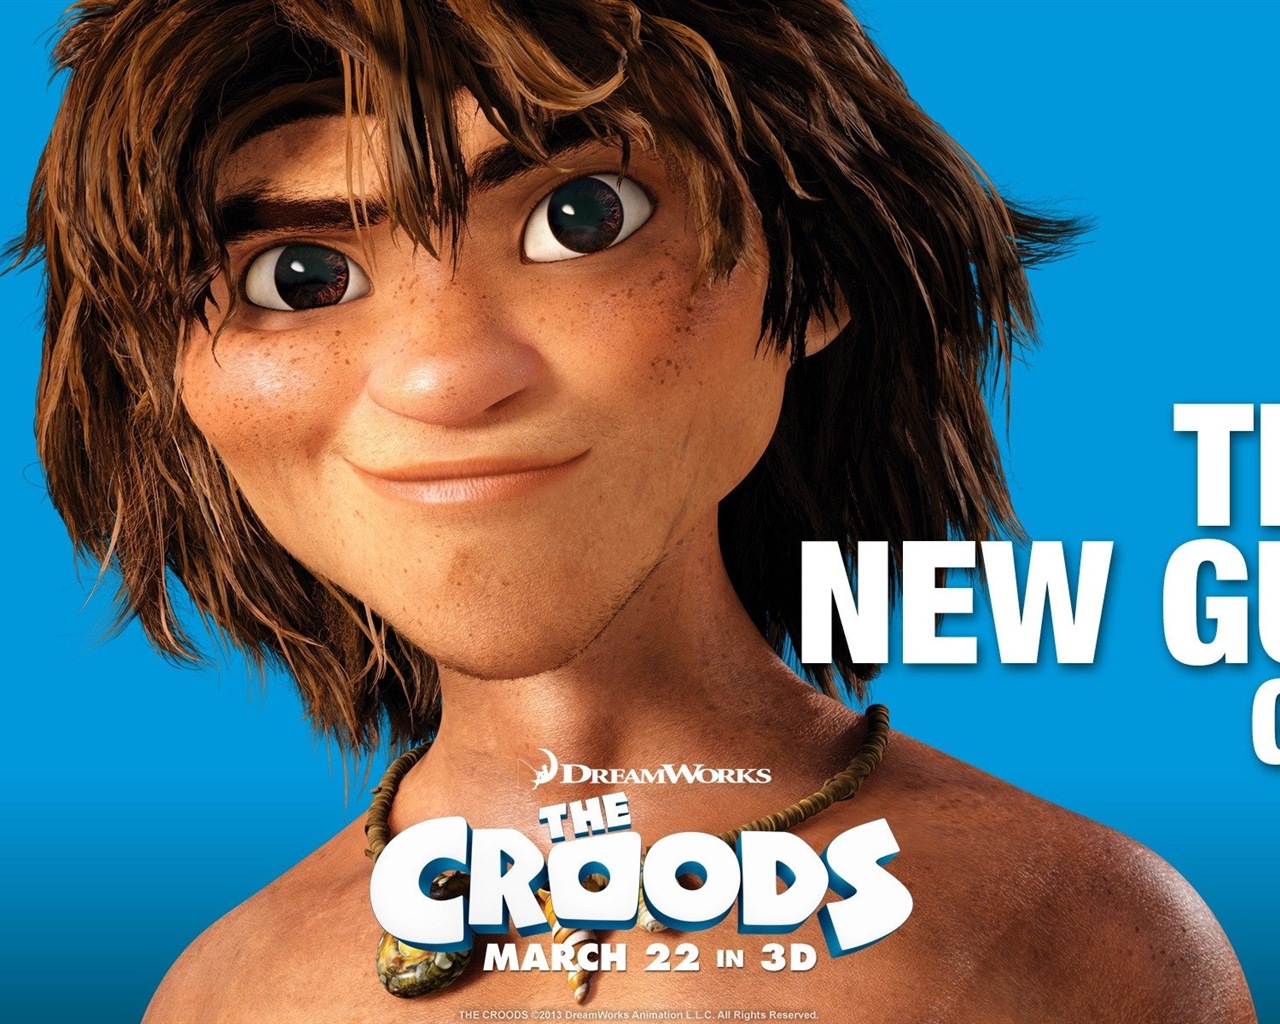 V Croods HD Movie Wallpapers #8 - 1280x1024